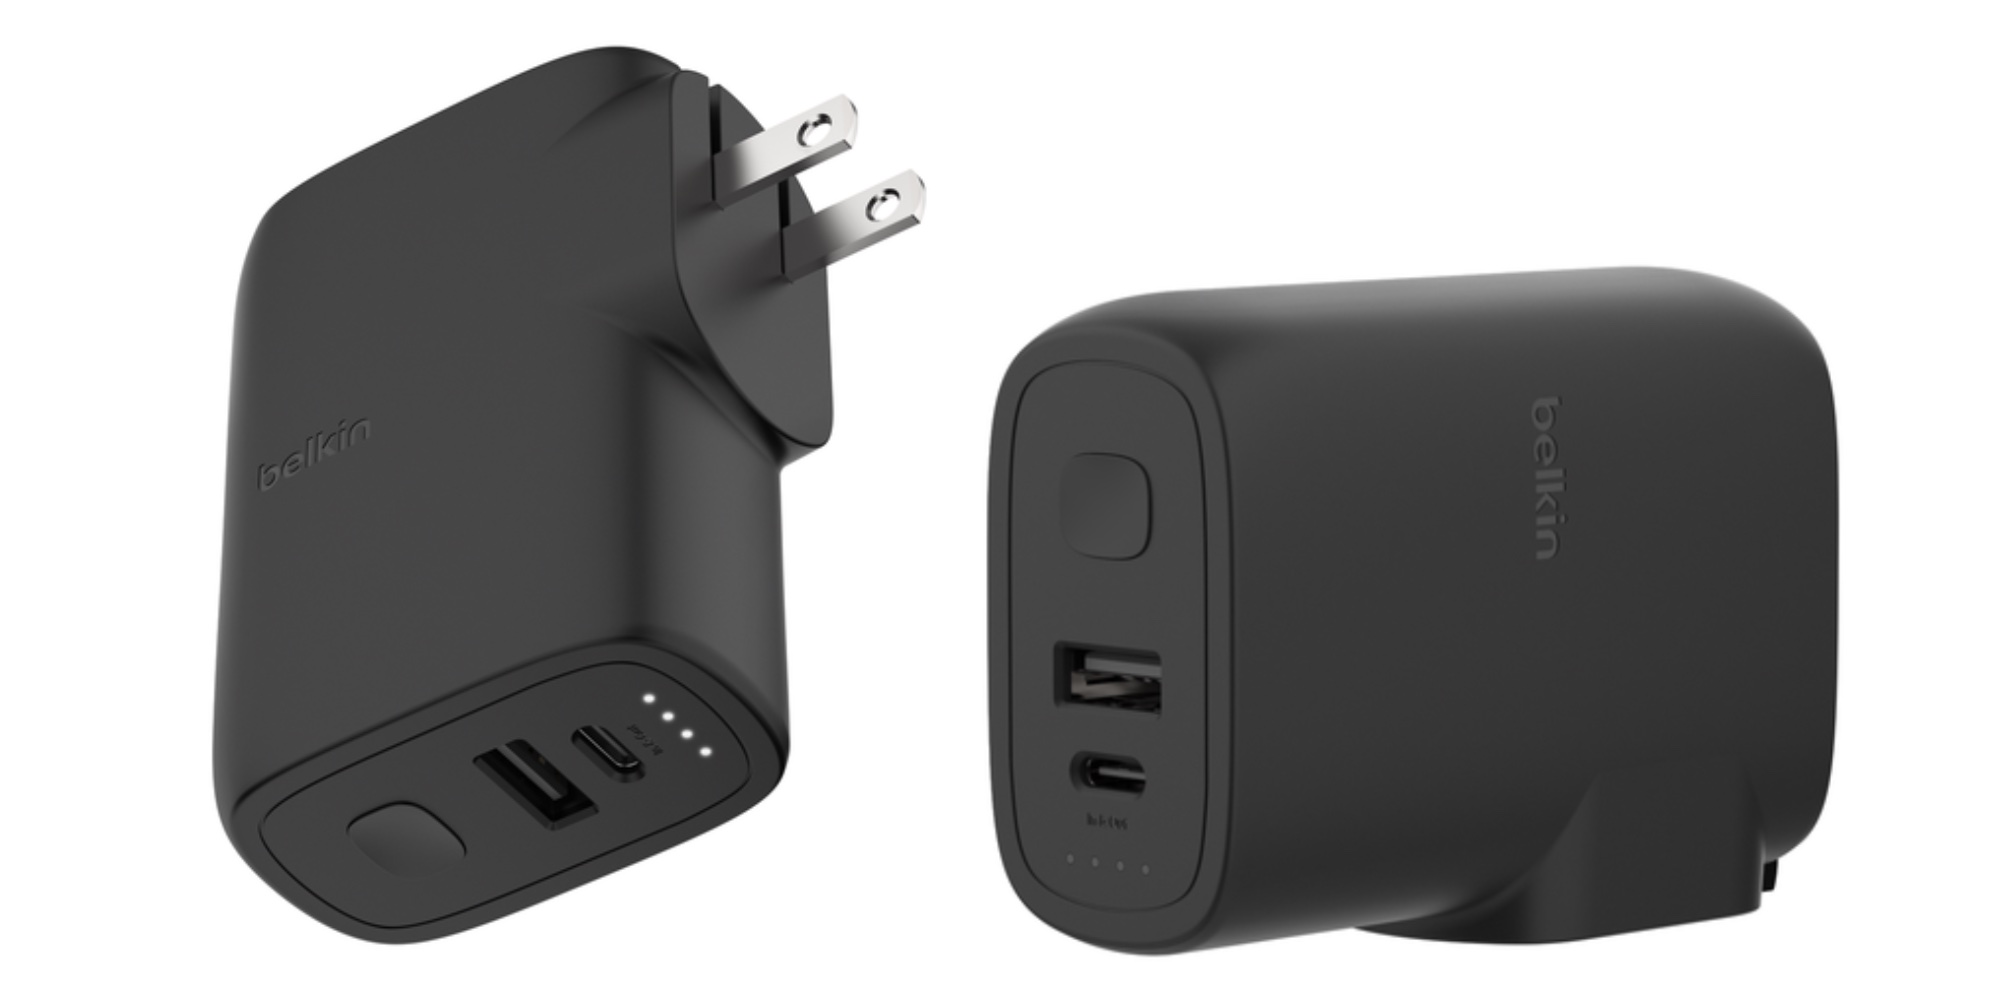 Belkin BoostCharge Hybrid debuts as power bank and wall charger